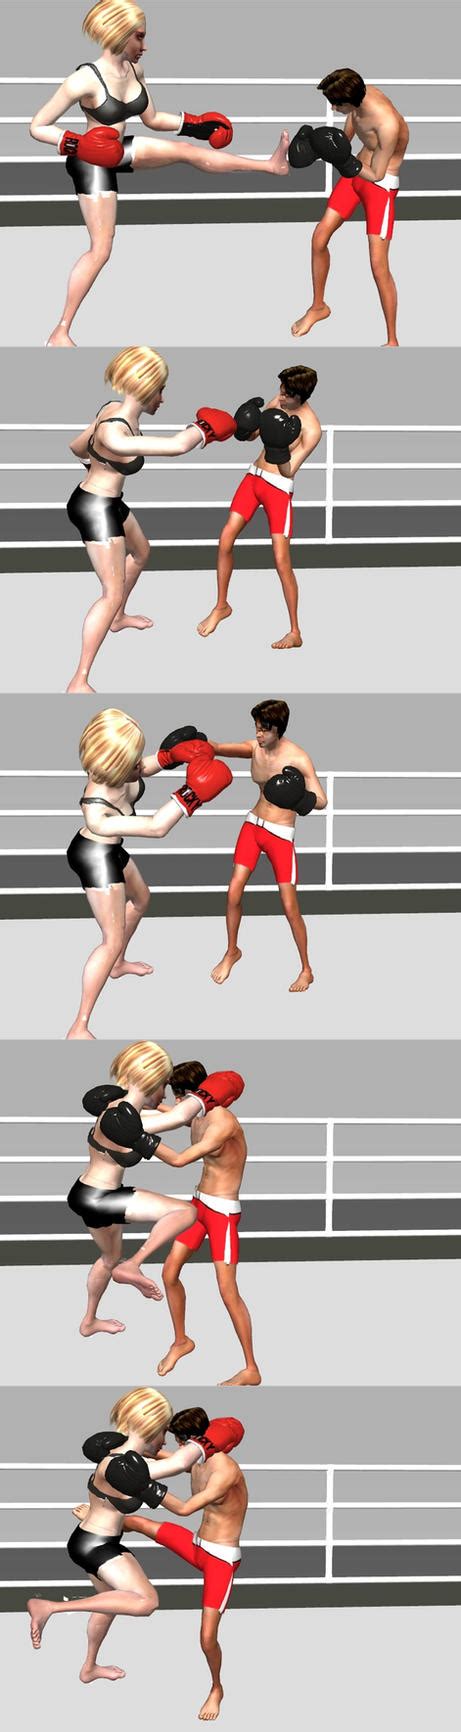 Mixed Kick Boxing Match Page02 By Andypedro On Deviantart